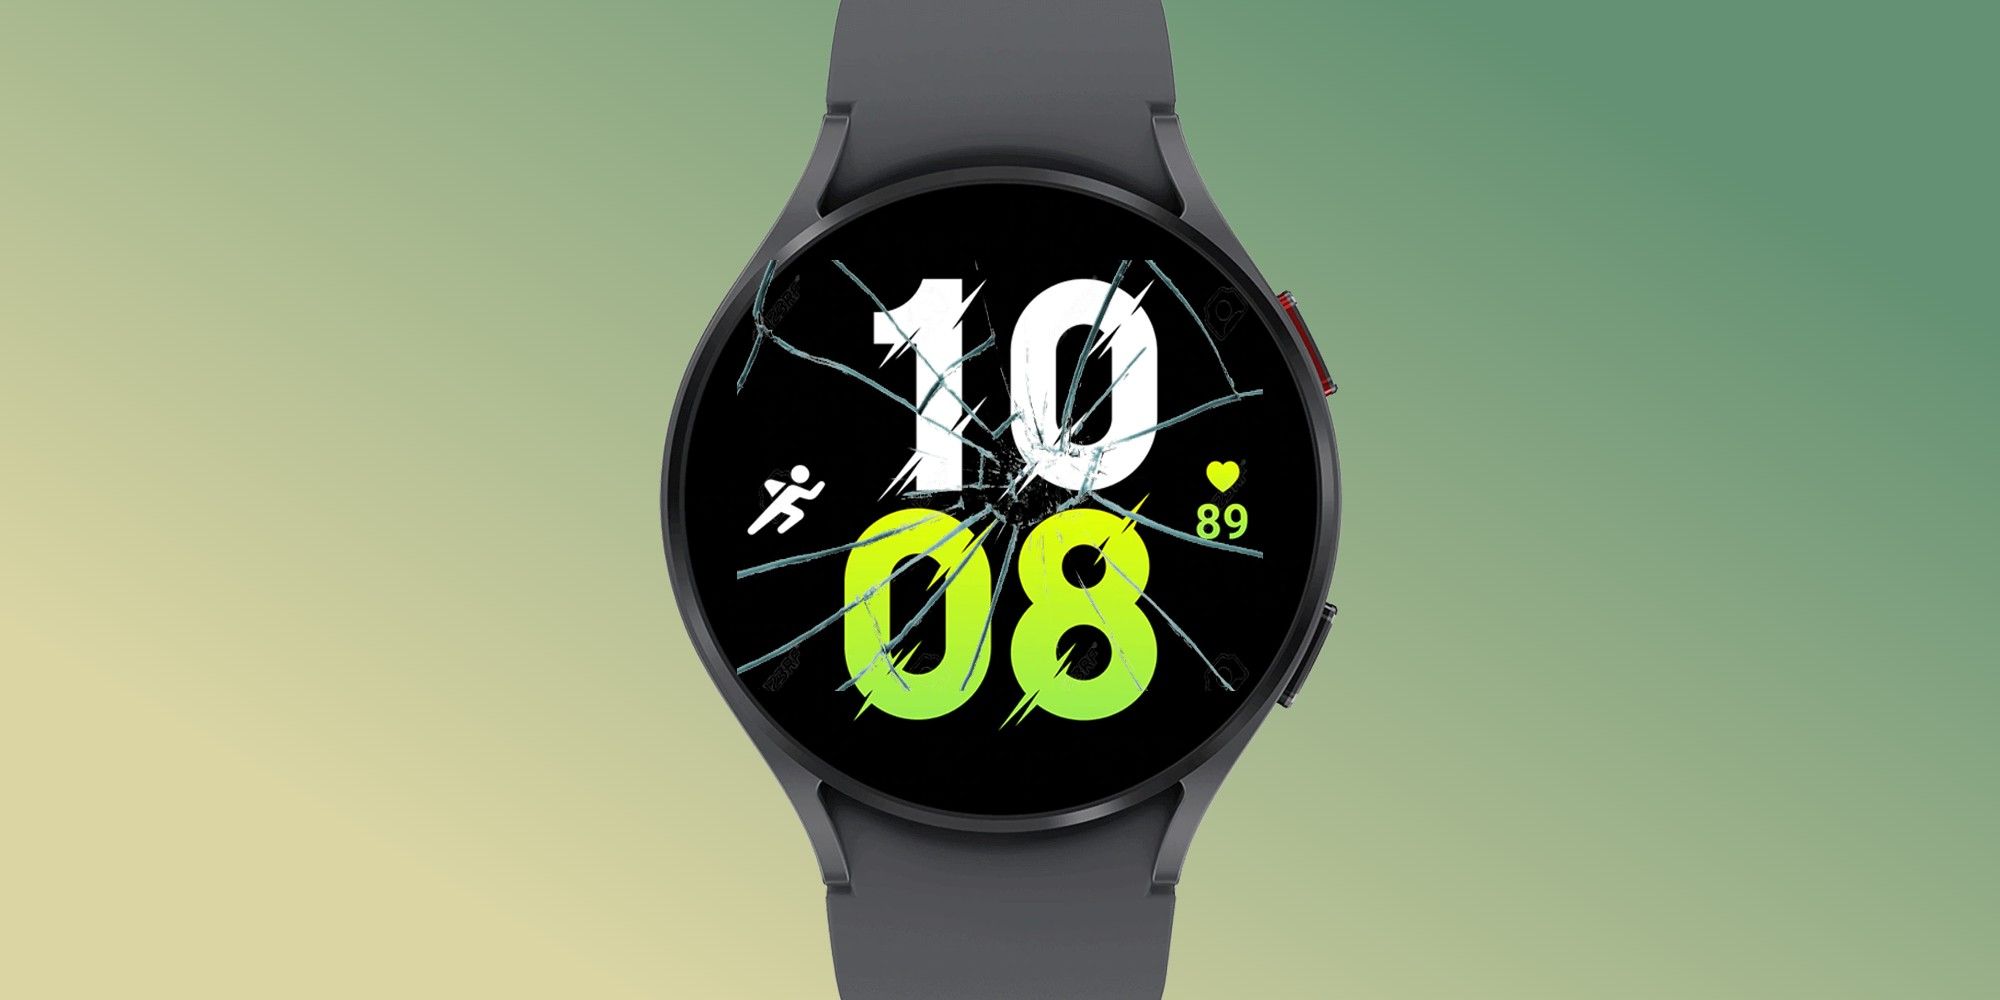 A render of the Galaxy Watch 5 with a cracked screen